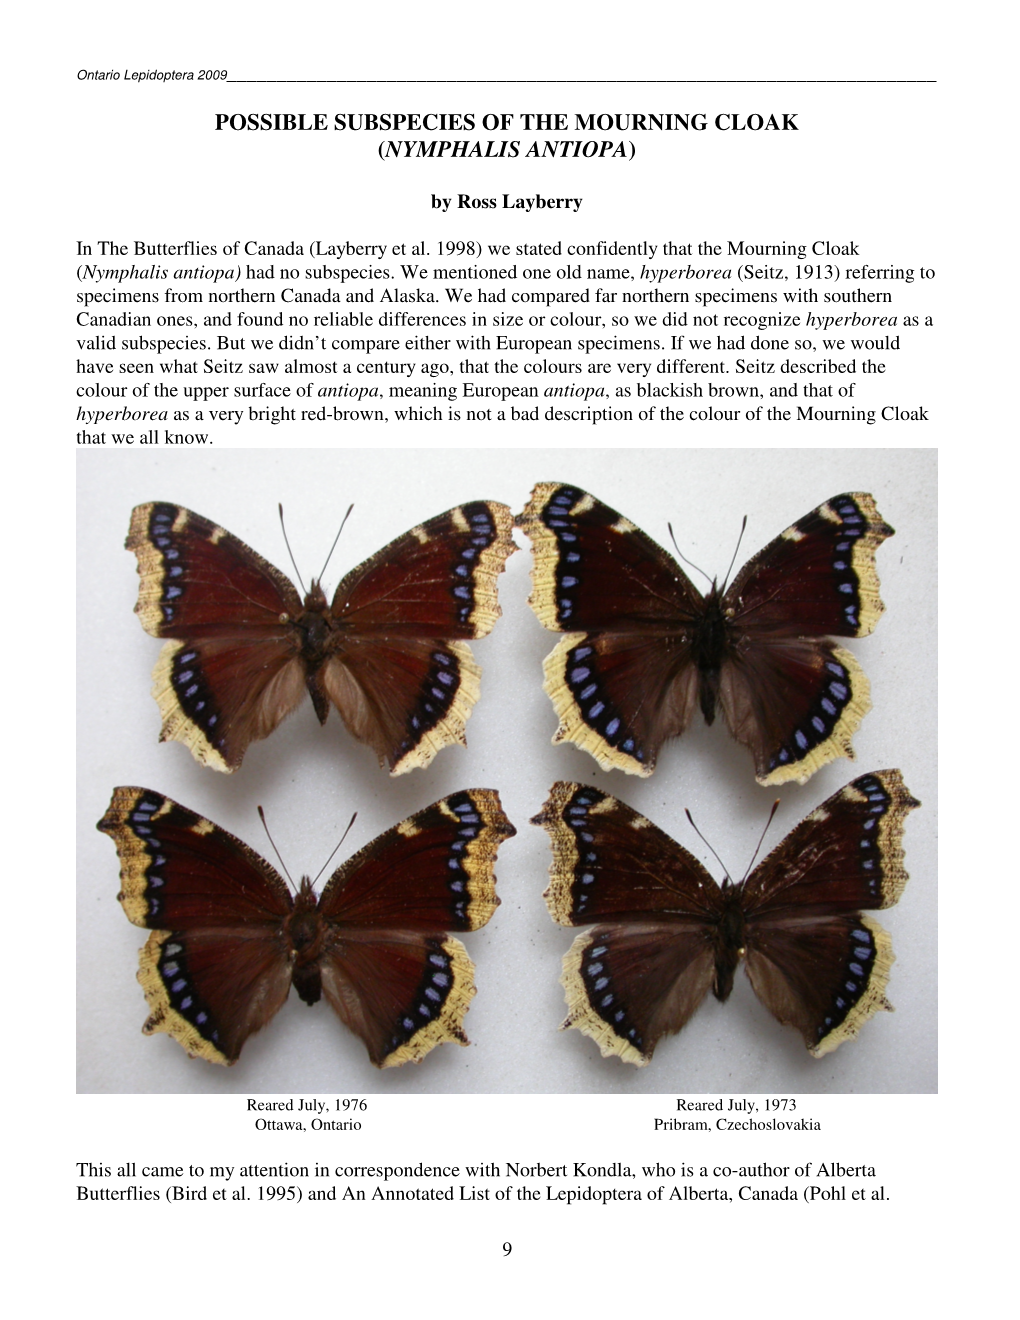 Possible Subspecies of the Mourning Cloak (Nymphalis Antiopa)